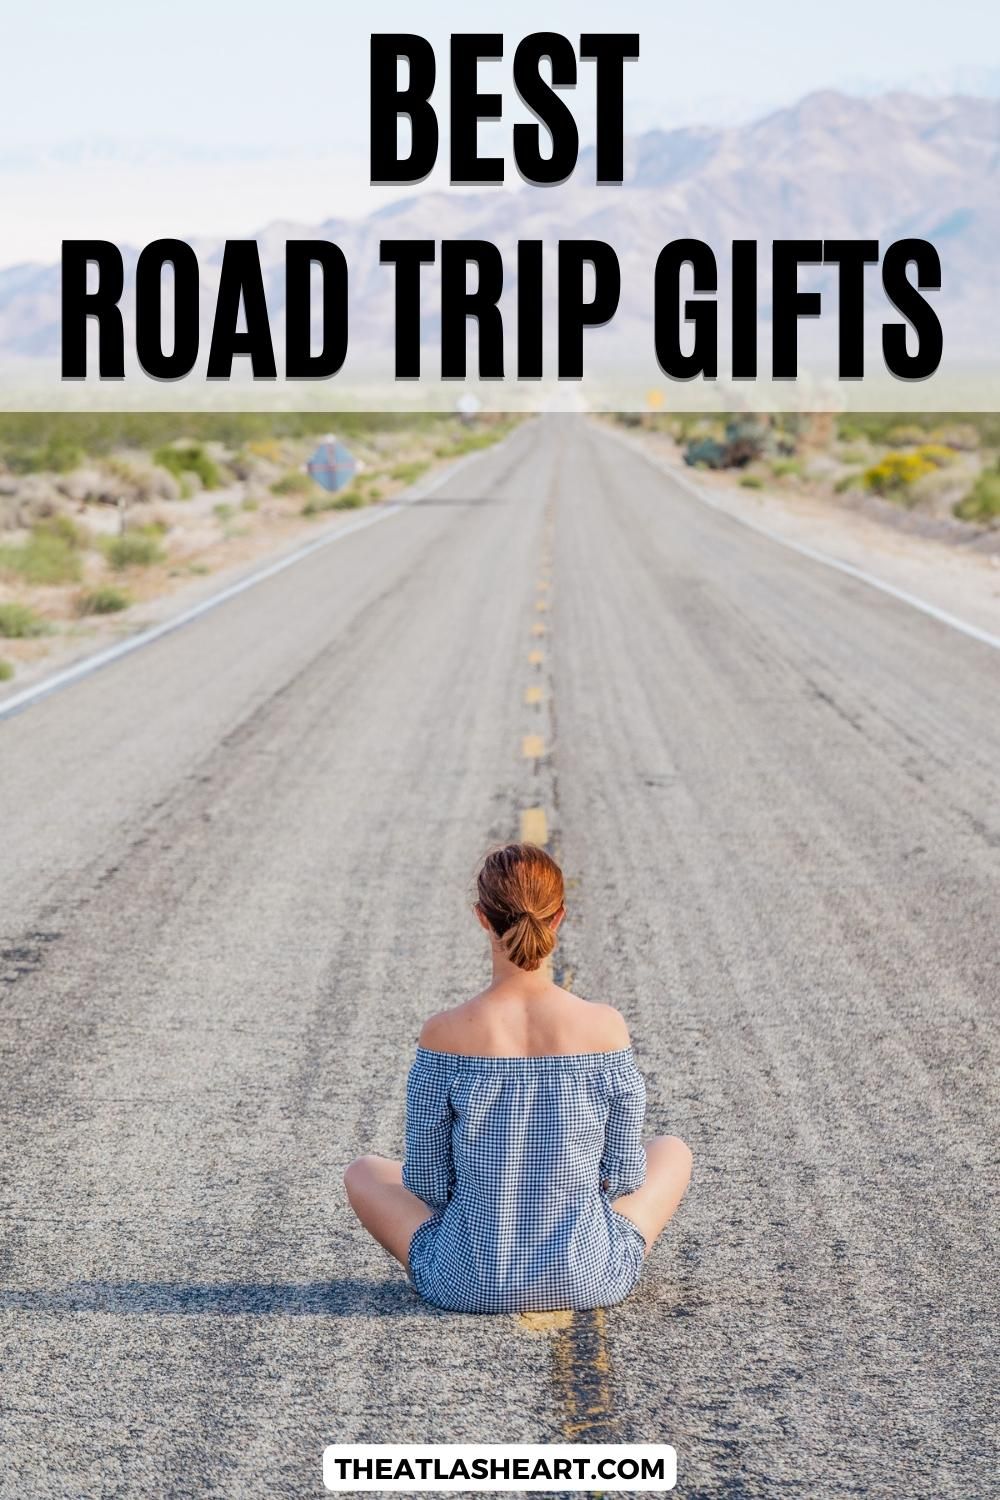 Best Road Trip Gifts Pin
A Pinterest pin with an image of a girl sitting cross-legged on an empty road in the middle of nowhere , with mountains in the background and the overlay text, "Best Road Trip Gifts."